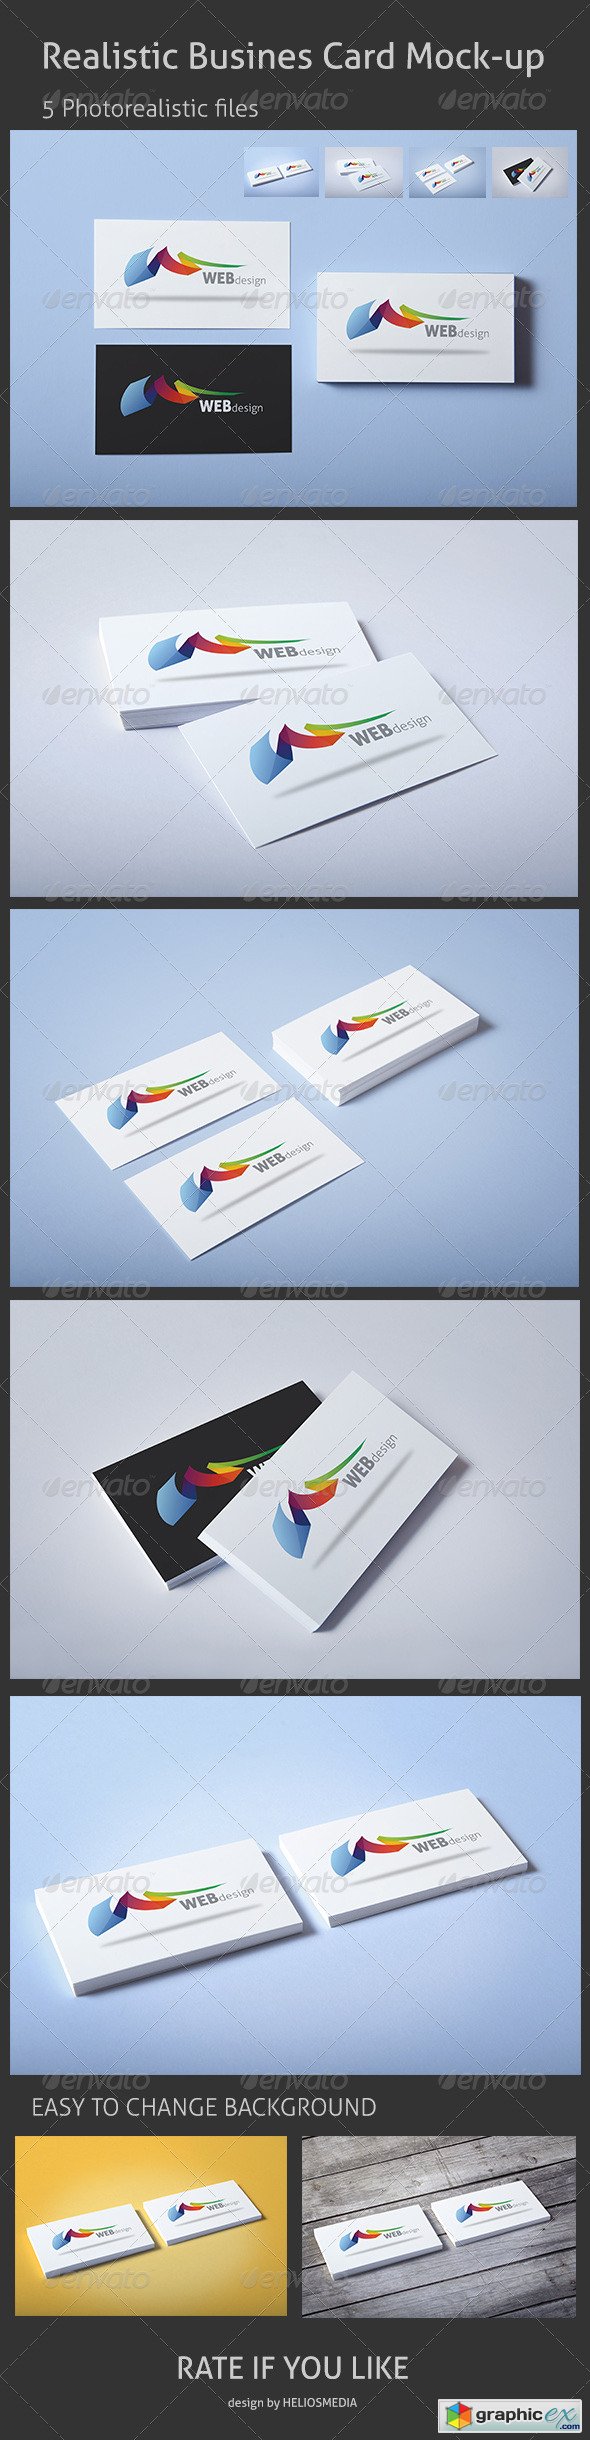 Realistic Business Card Mock-up - 3441462